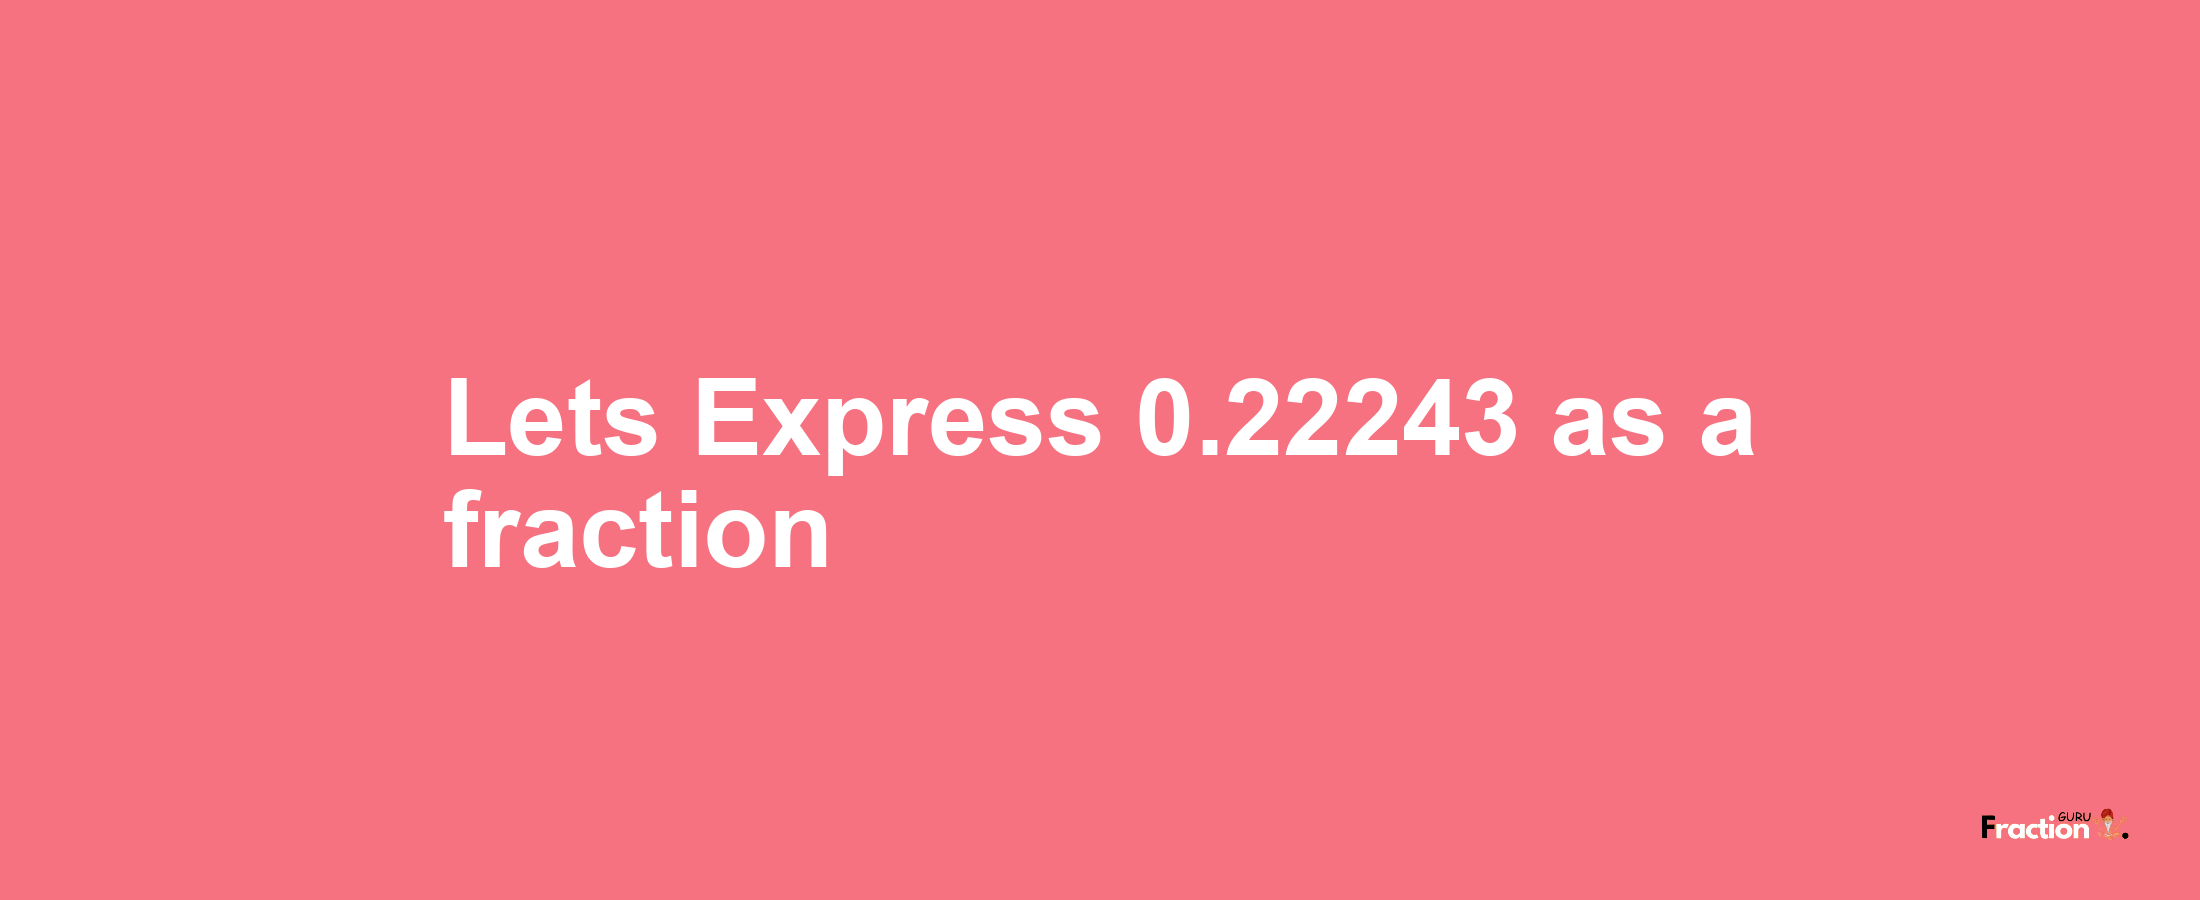 Lets Express 0.22243 as afraction